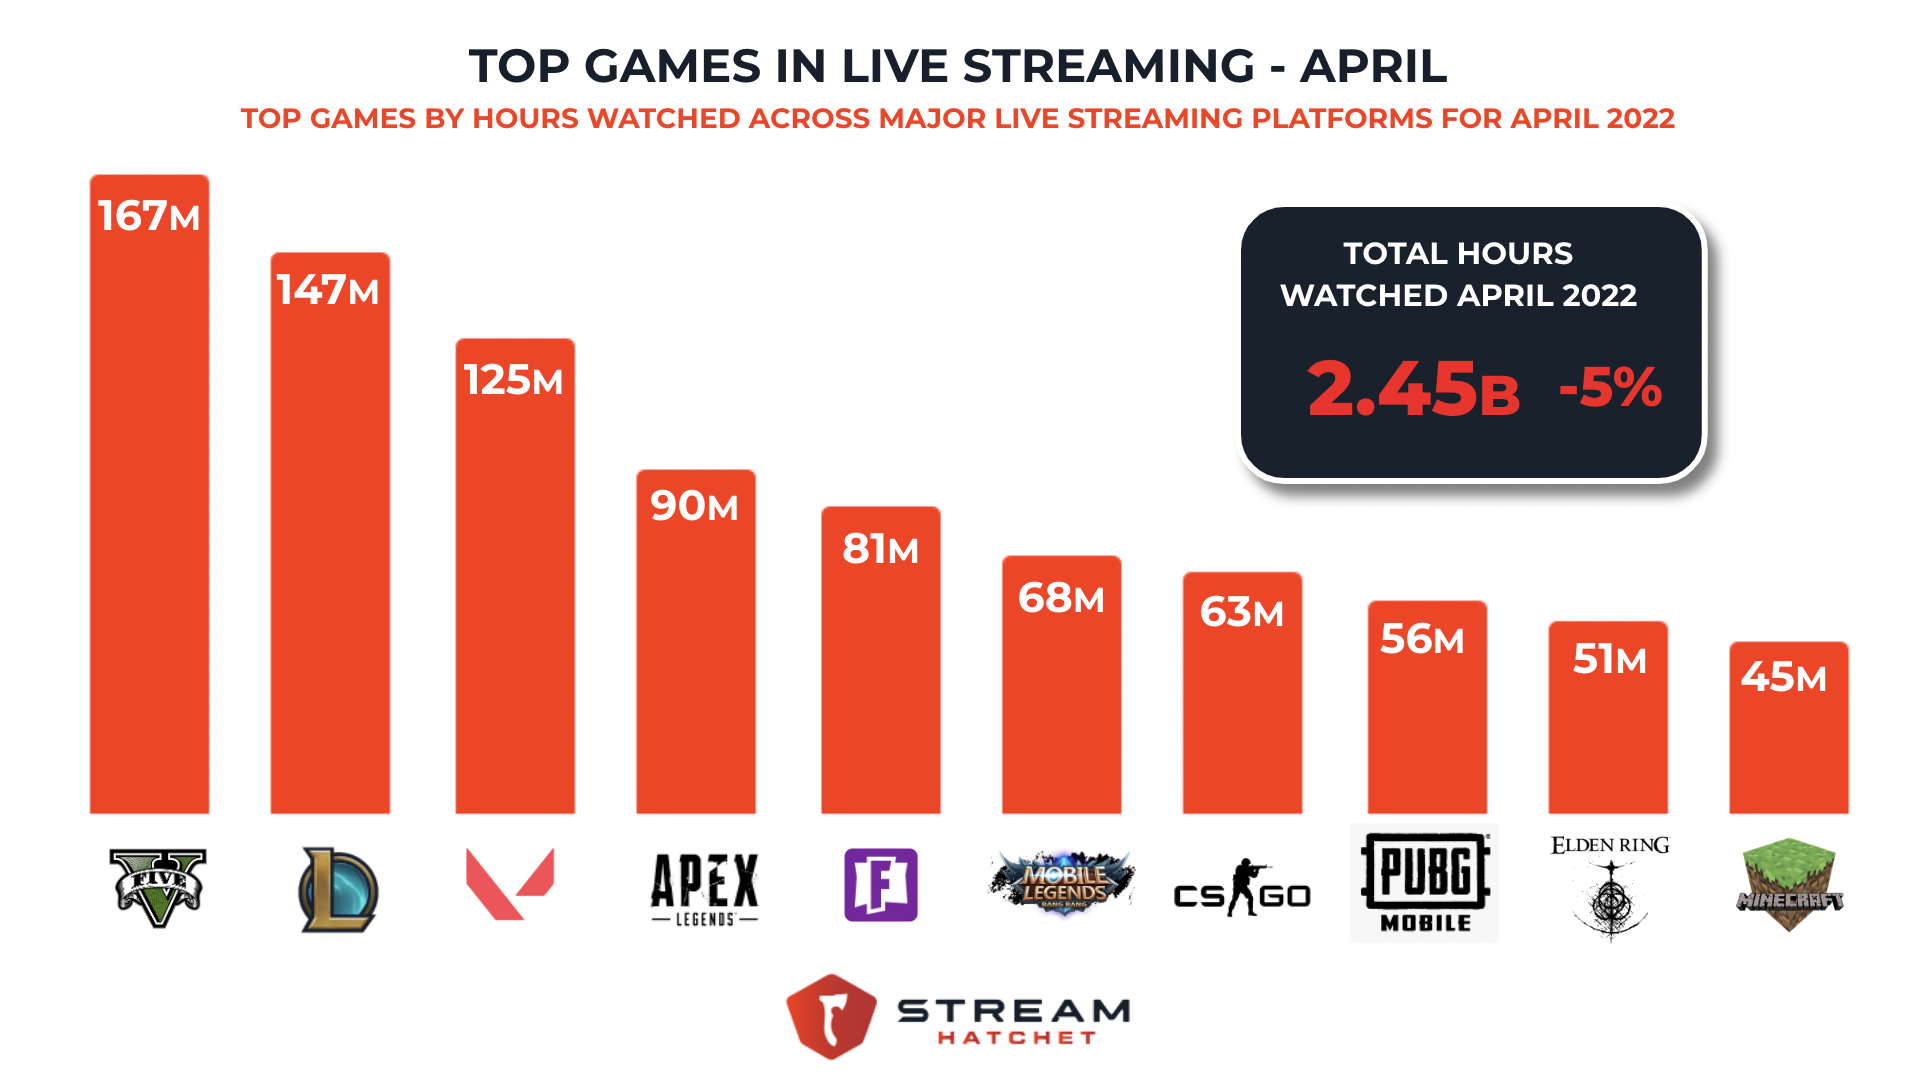 Top Games in Live Streaming - April 2022